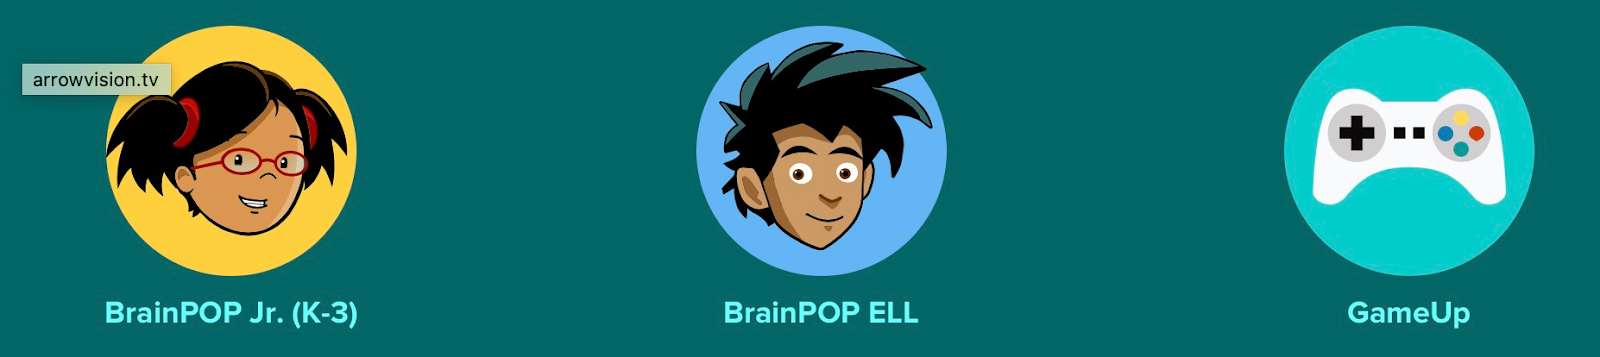 Brain Pop - Animated Educational Site for Kids